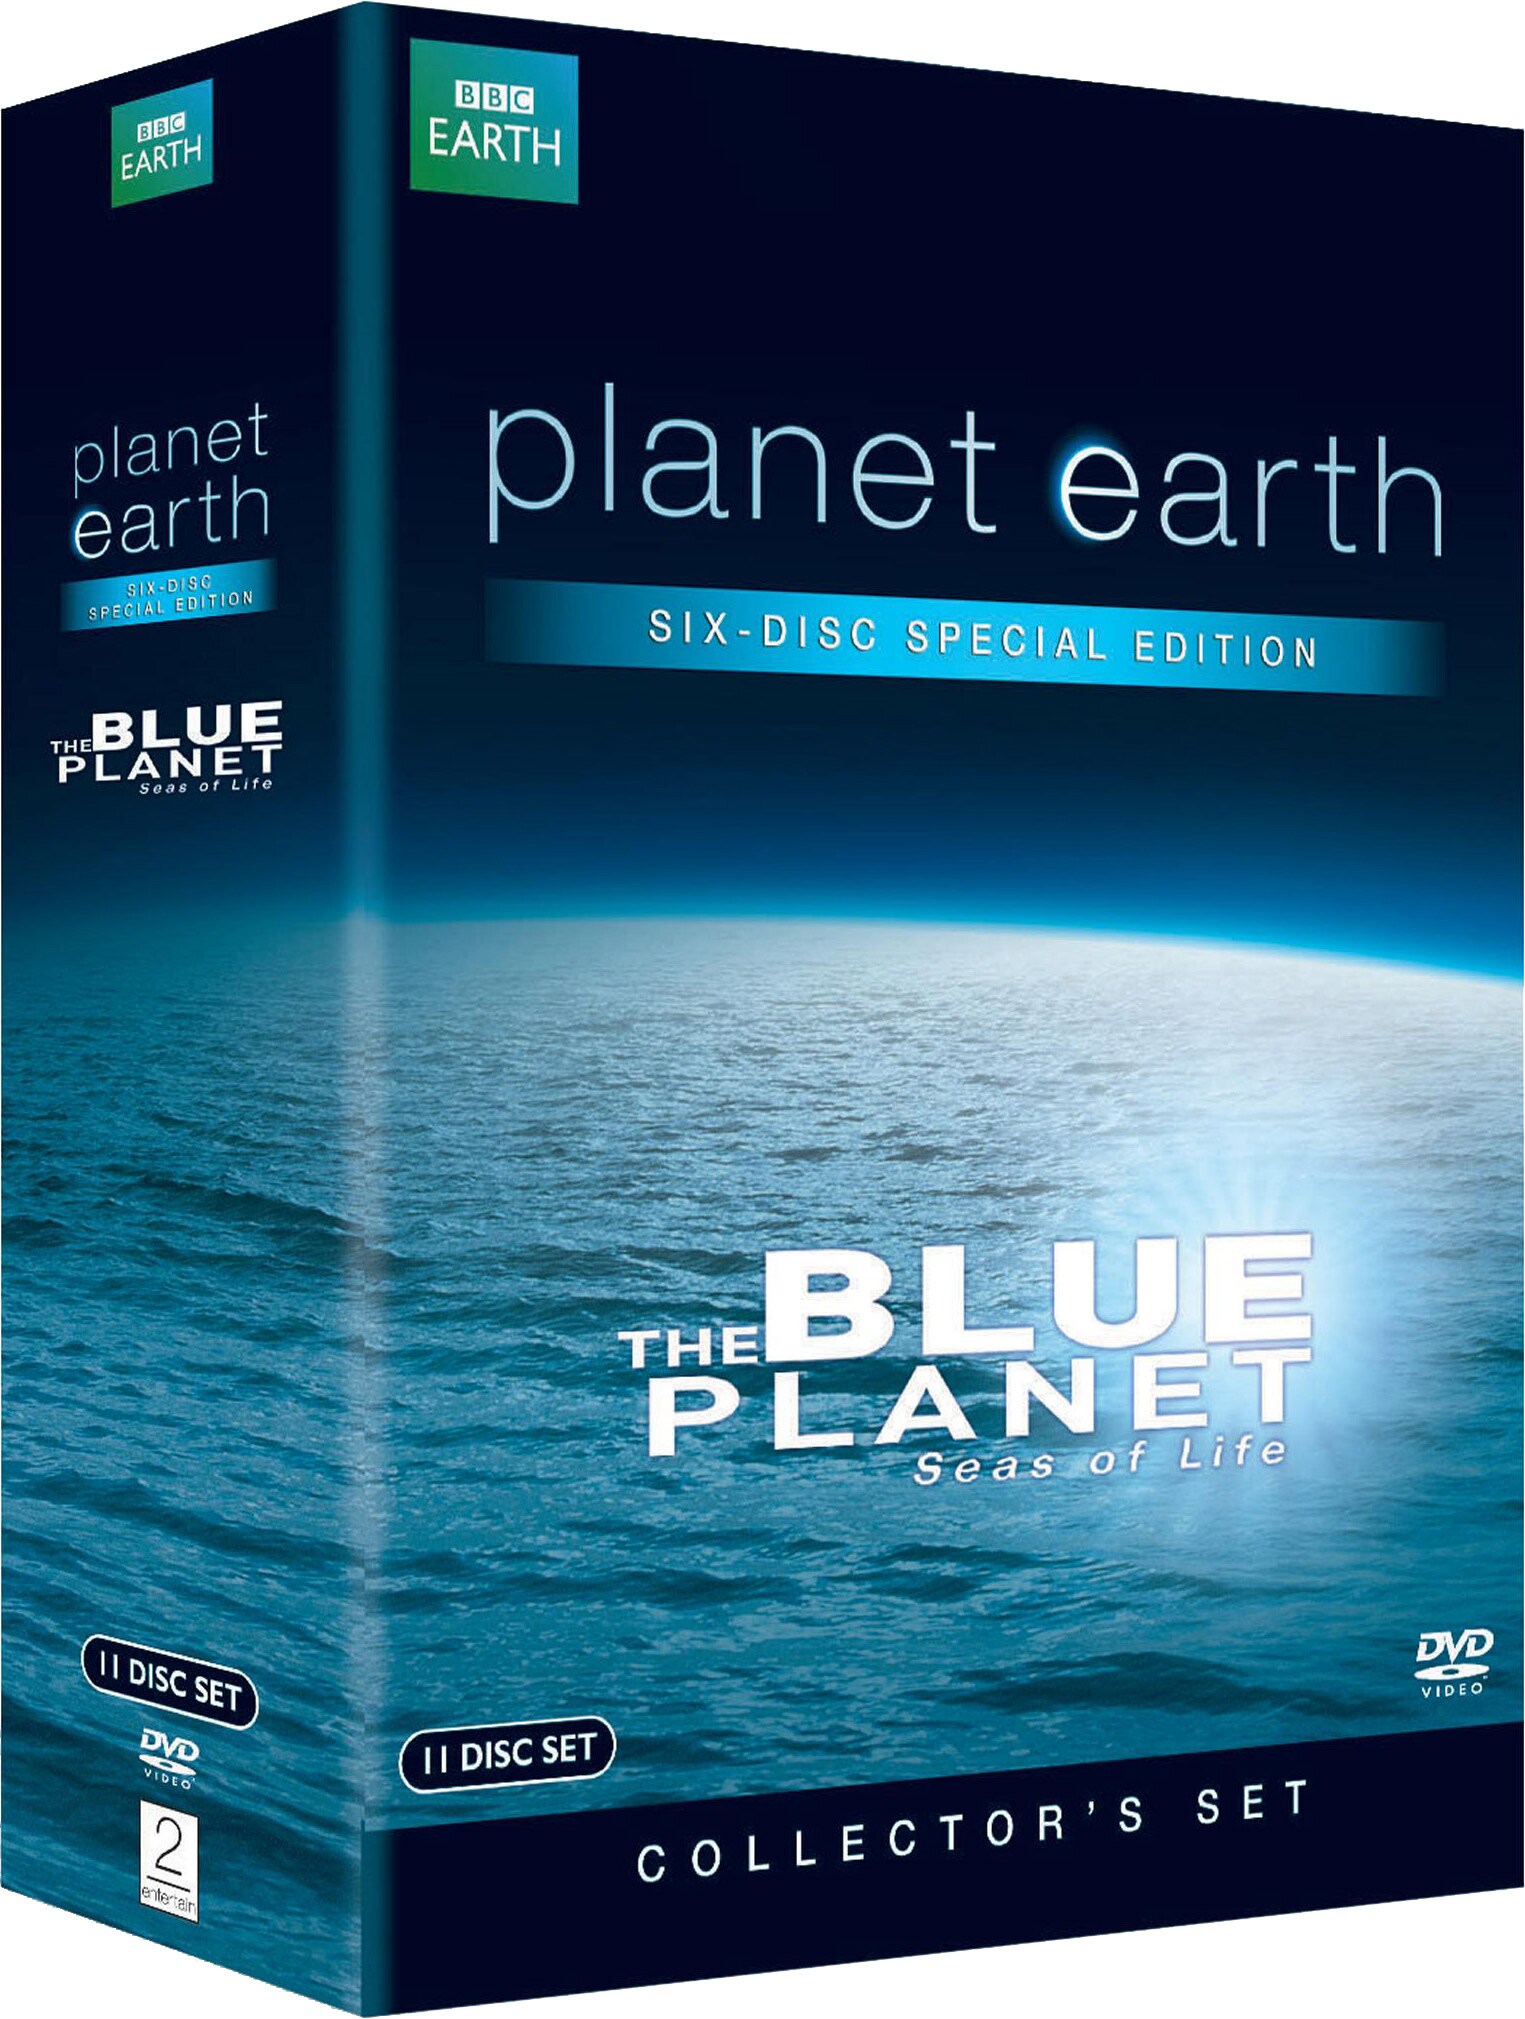 planet earth and blue planet dvd